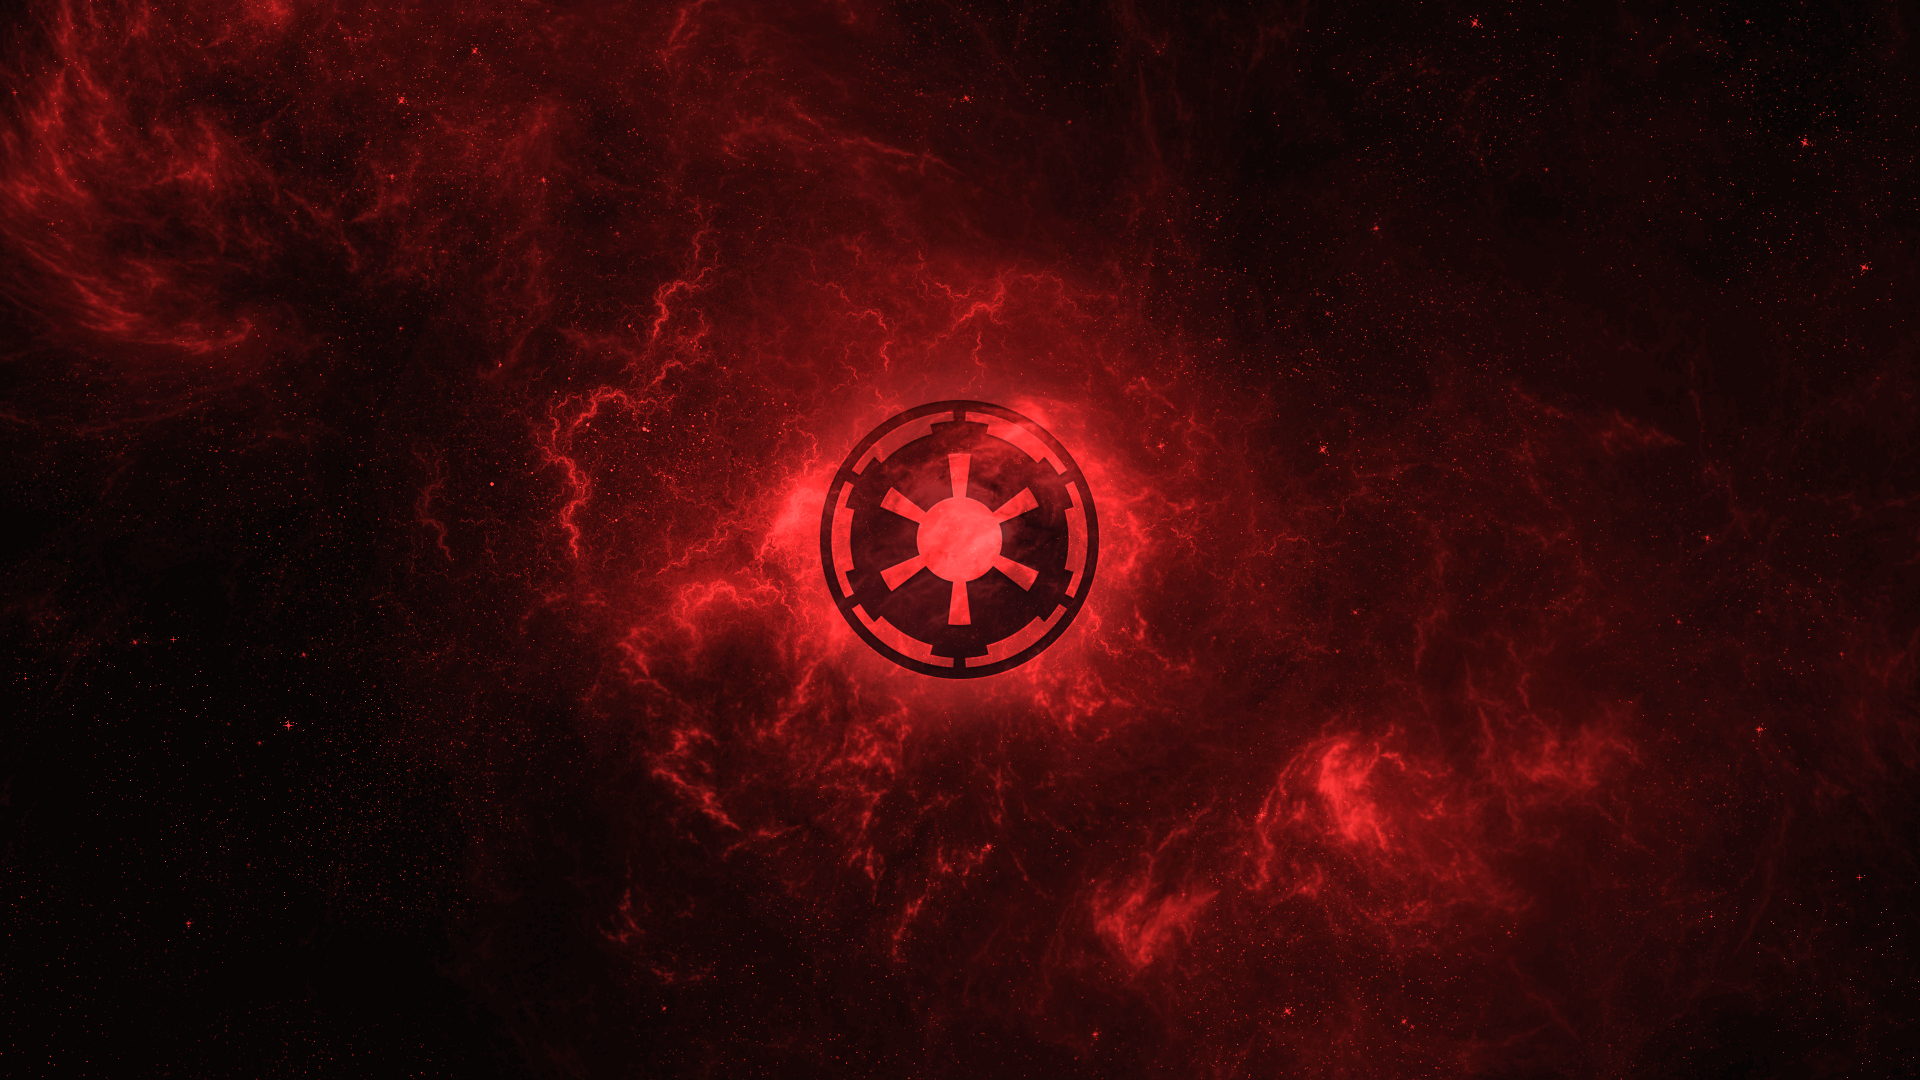 1920x1080 Star Wars Sith Empire Wallpapers Top Free Star Wars Sith Empire Backgrounds